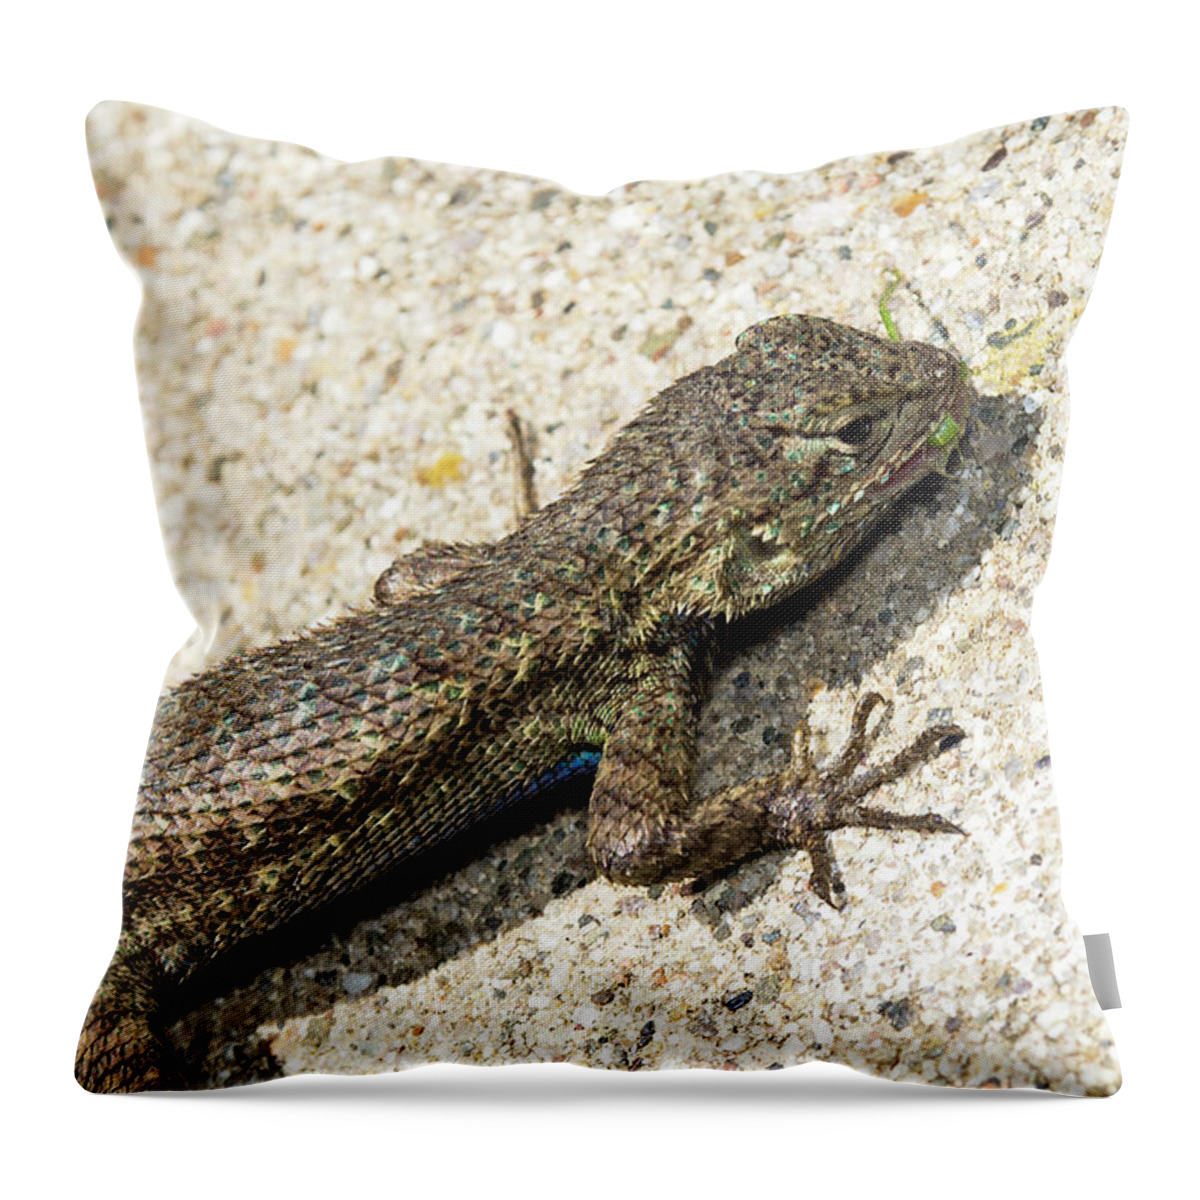 Blue Throw Pillow featuring the photograph Nom nom nom by Shawn Jeffries